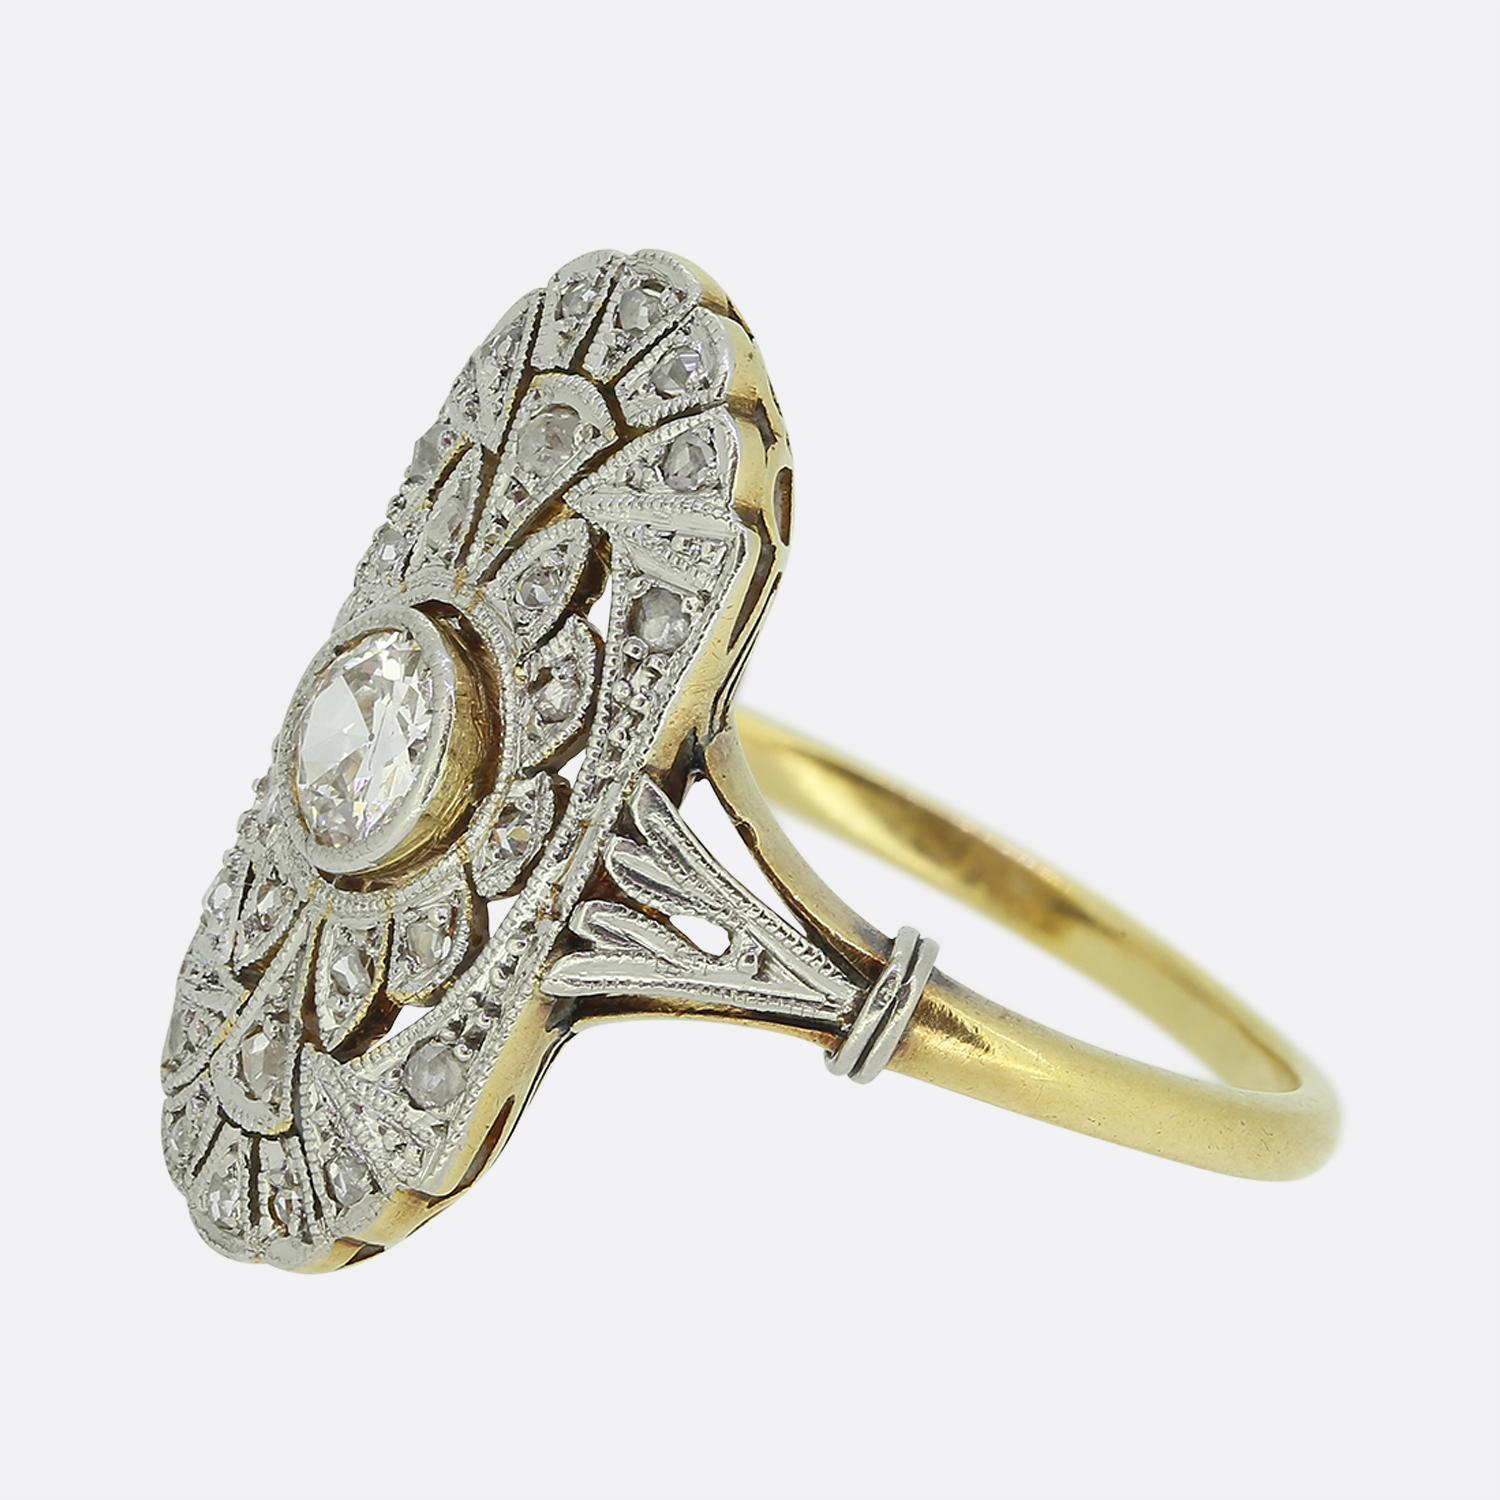 Here we have a charming diamond tablet ring taken from the early stages of the 20th century. This antique piece showcases a single round faceted old European cut diamond at the centre of the face in a fine milgrain setting. This principal stone sits